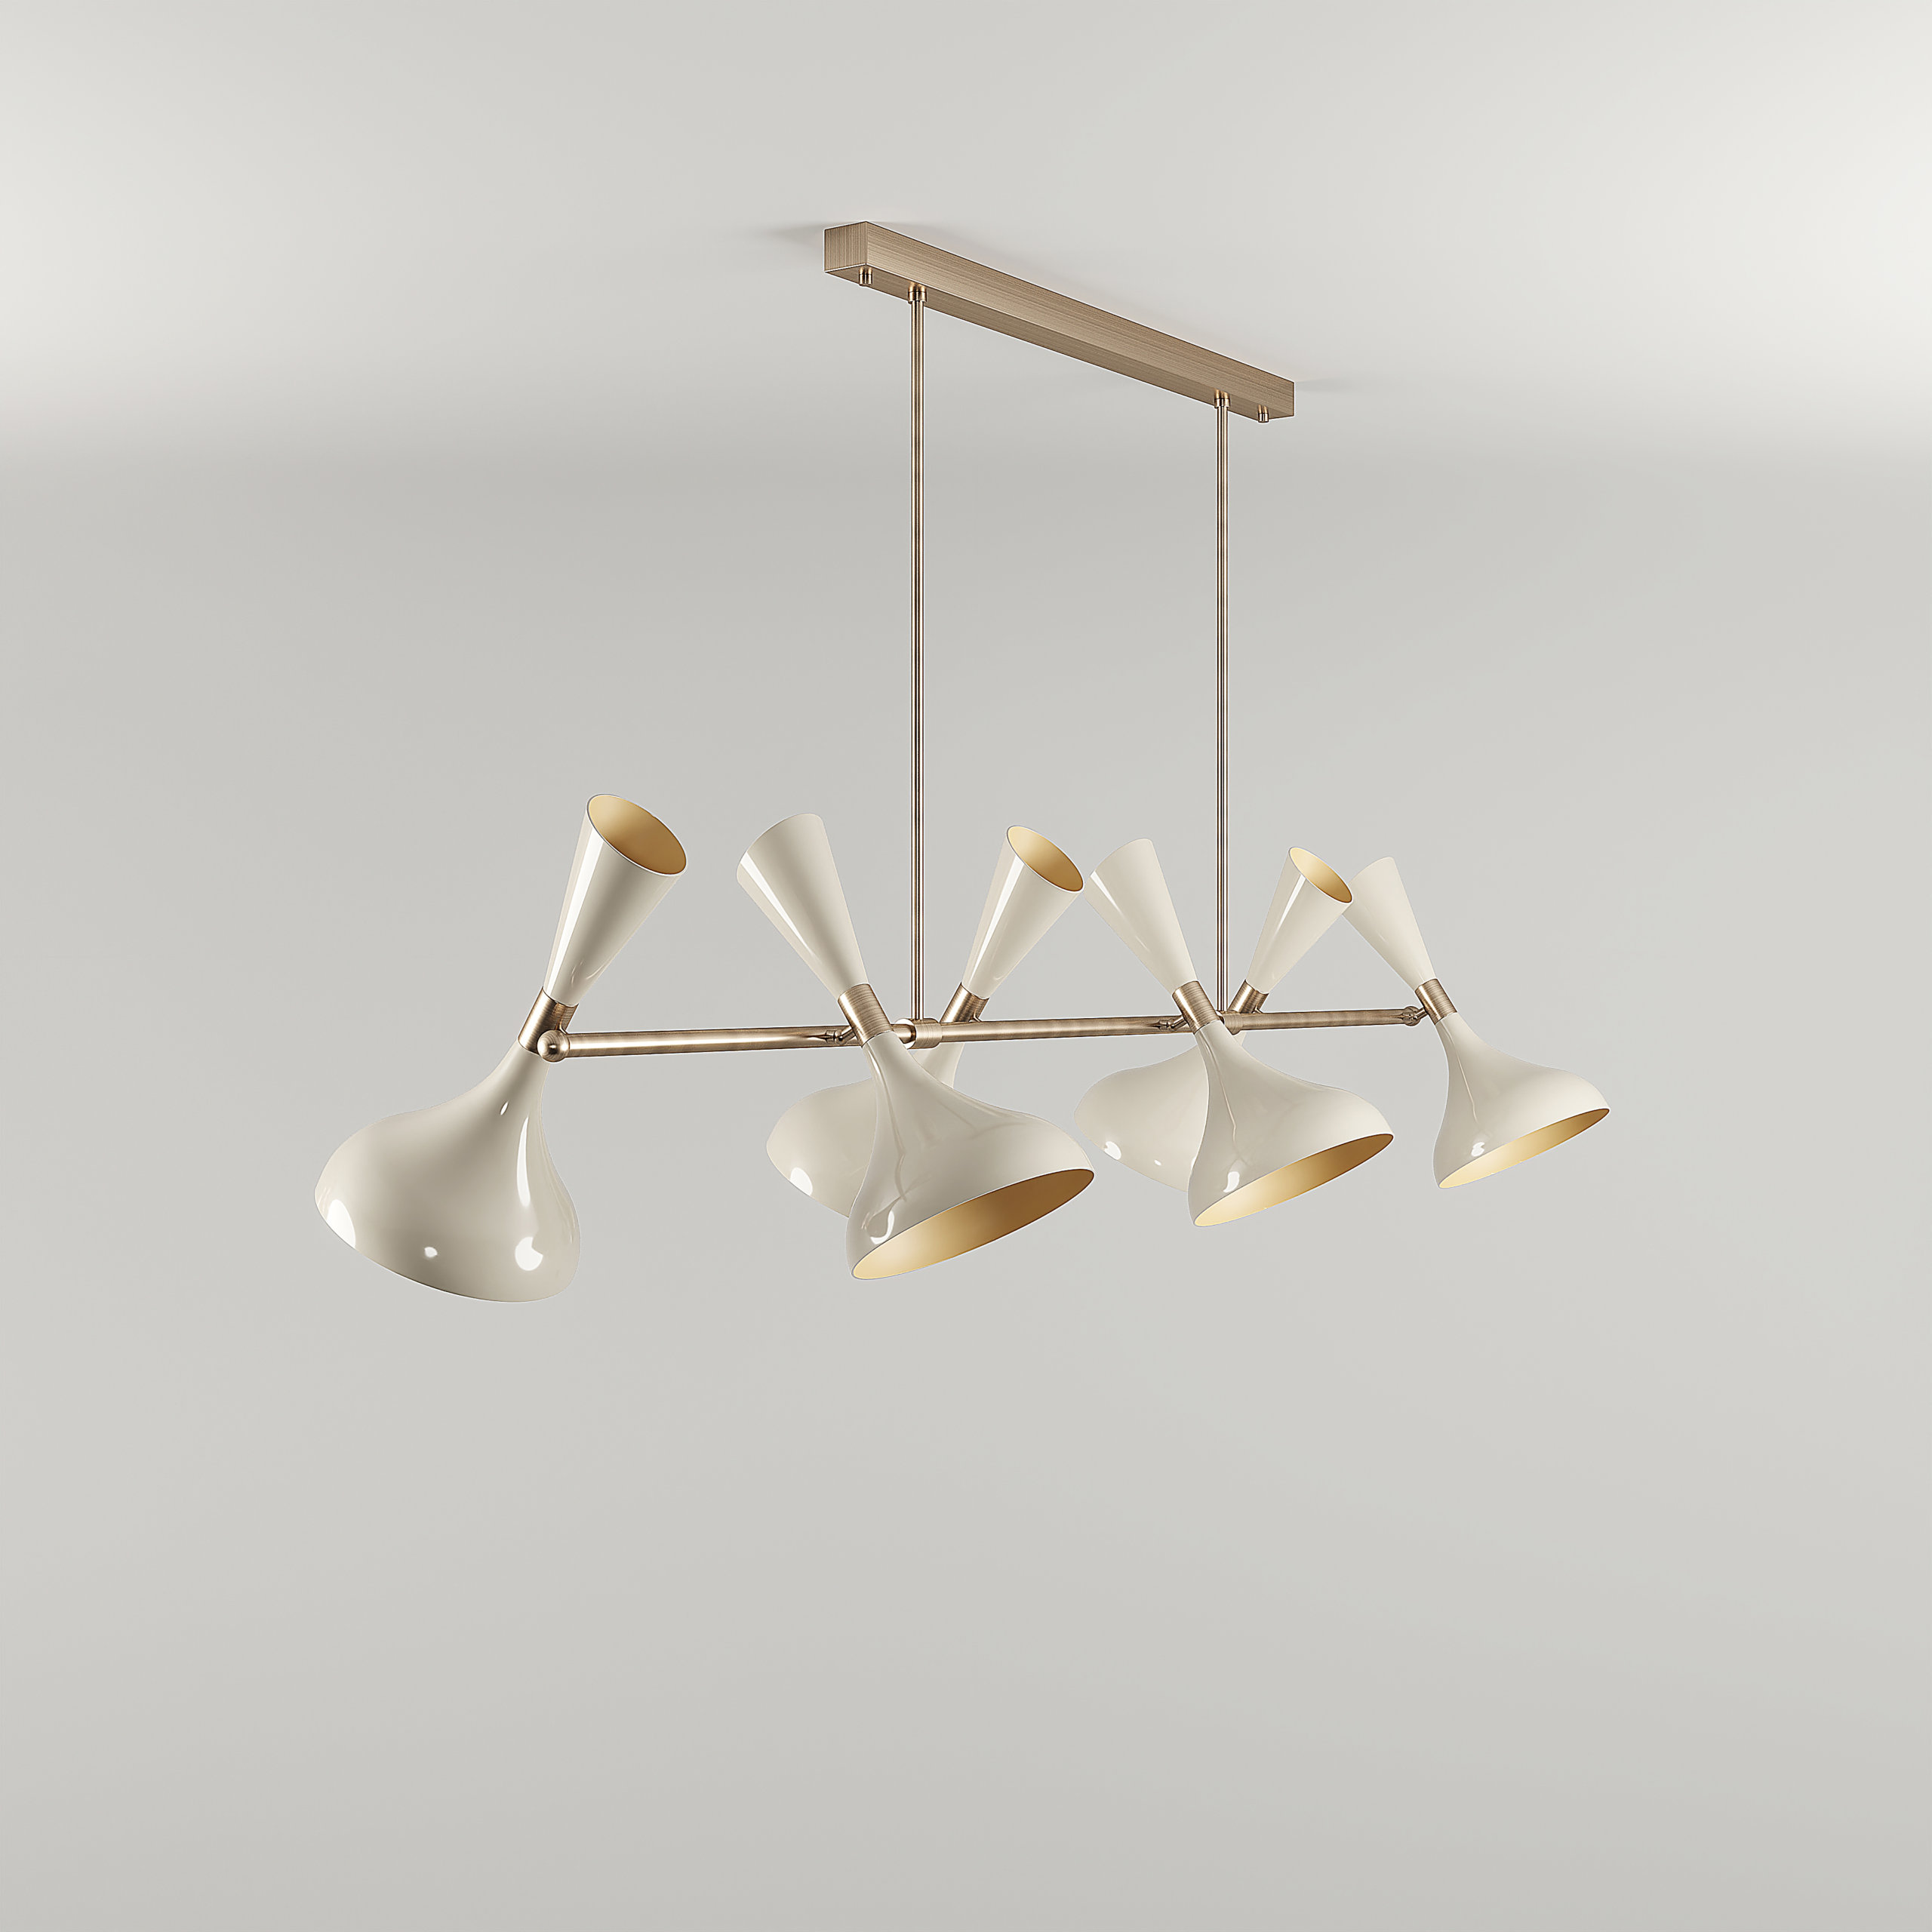 zuiden logica Mens Helsinki II Suspension Lamp By Creativemary Passionate